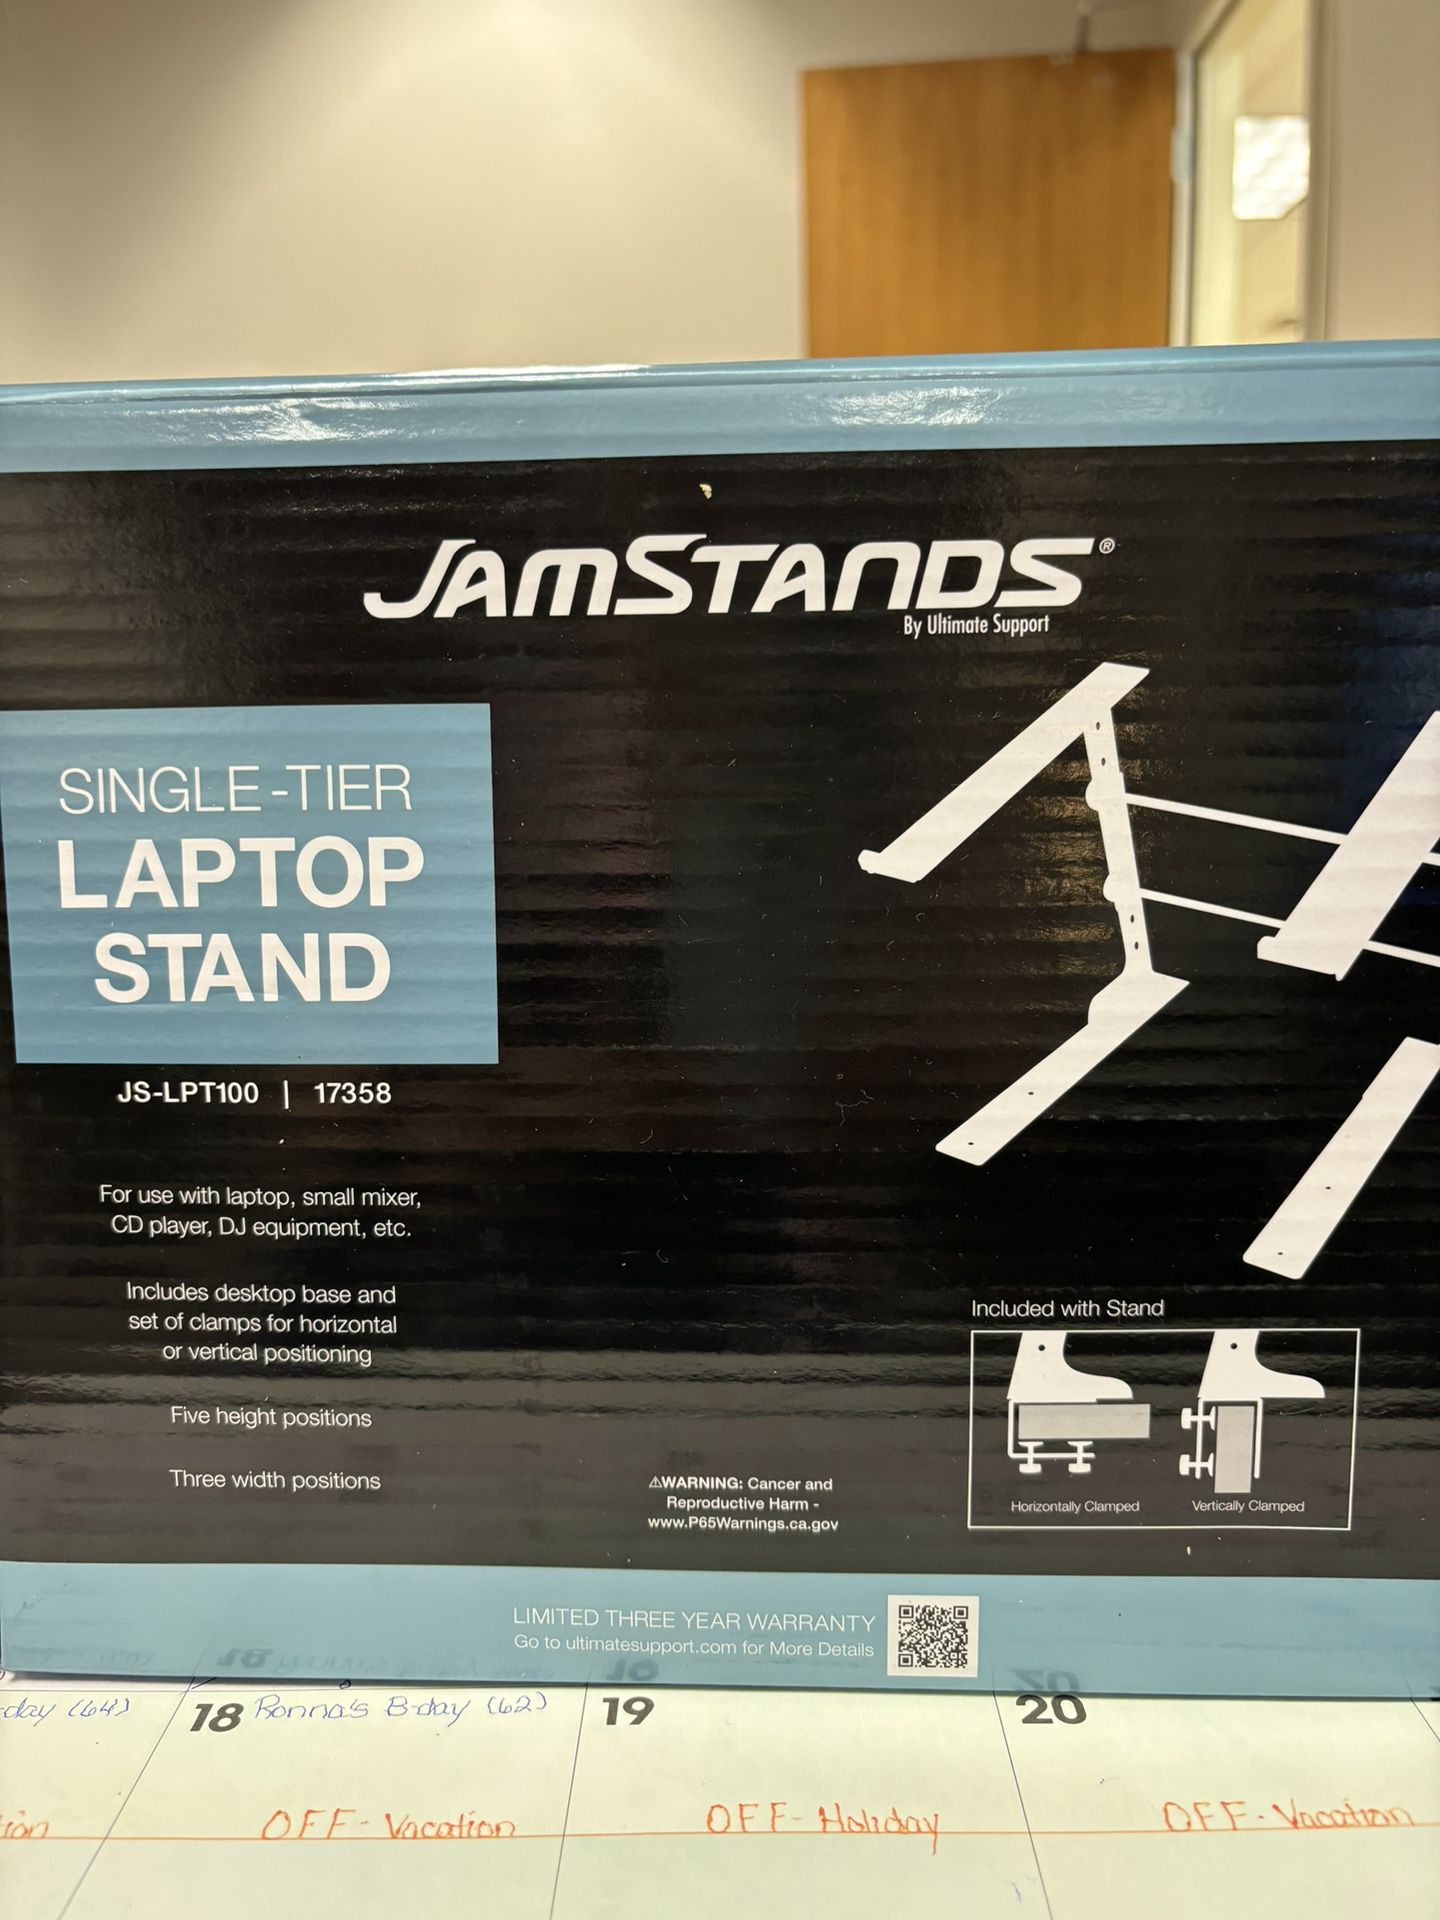 Jamstands Single-Tier Laptop Stand